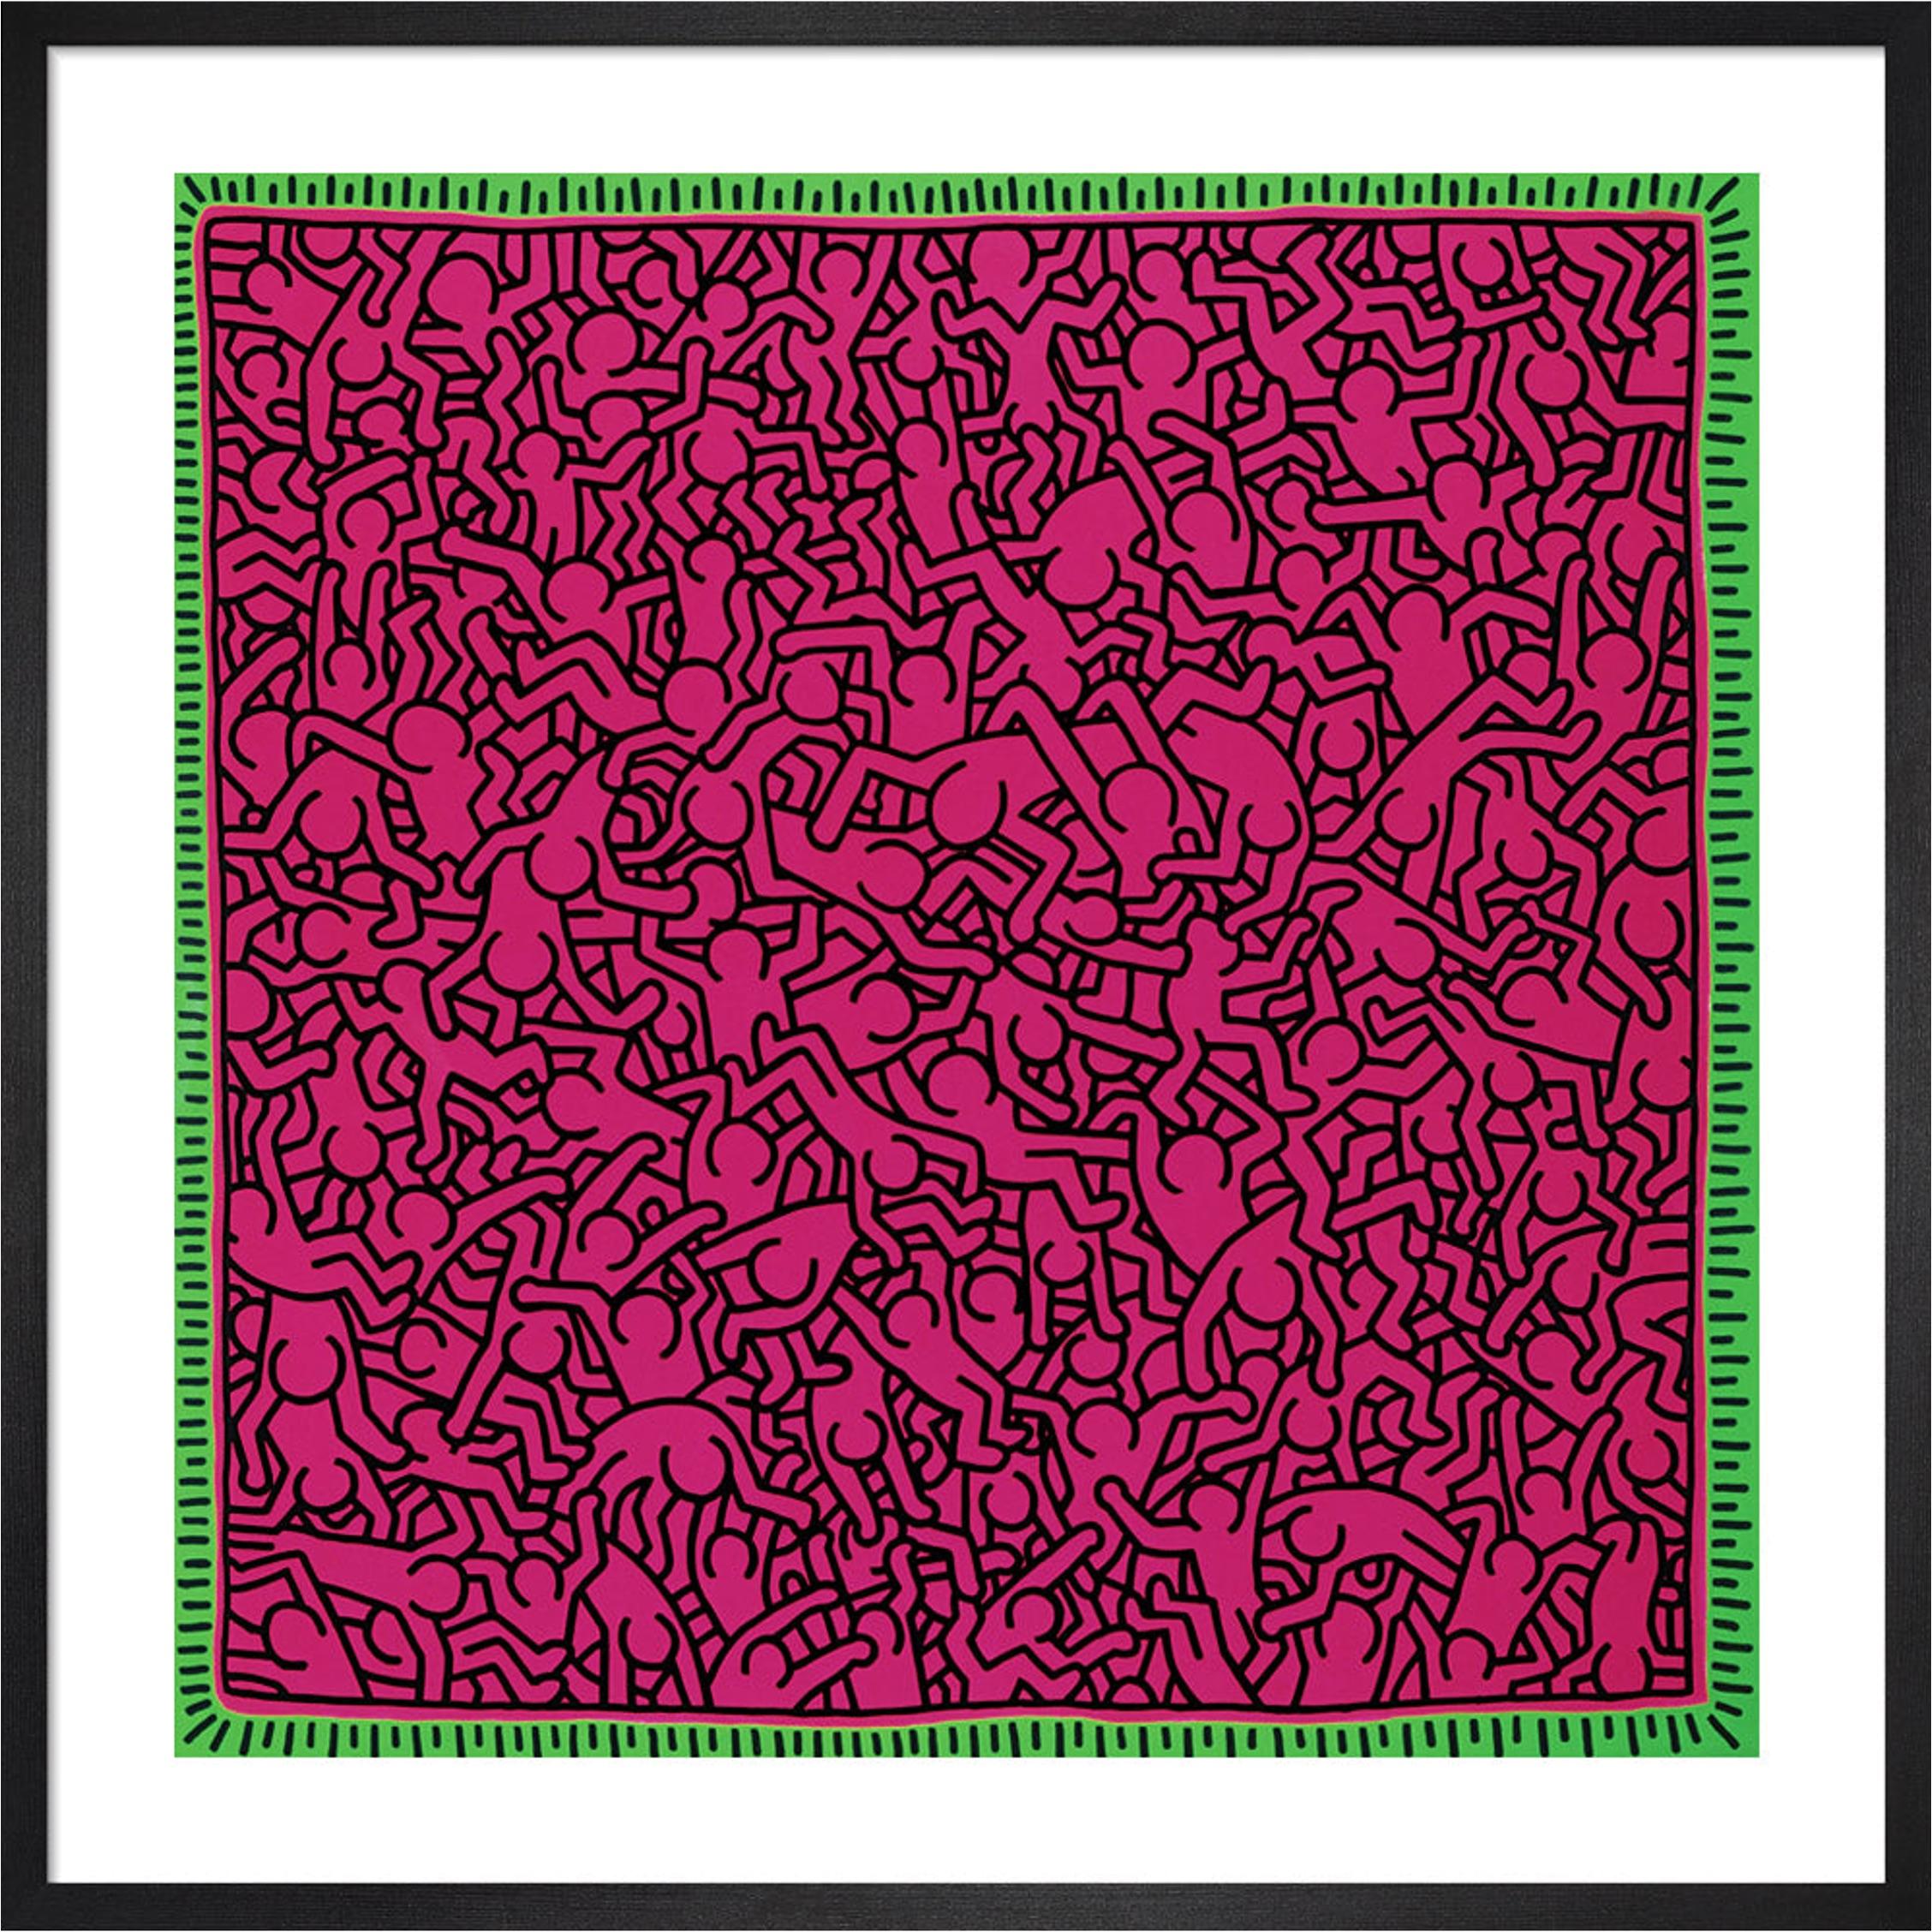 Keith Haring - Untitled Framed Print